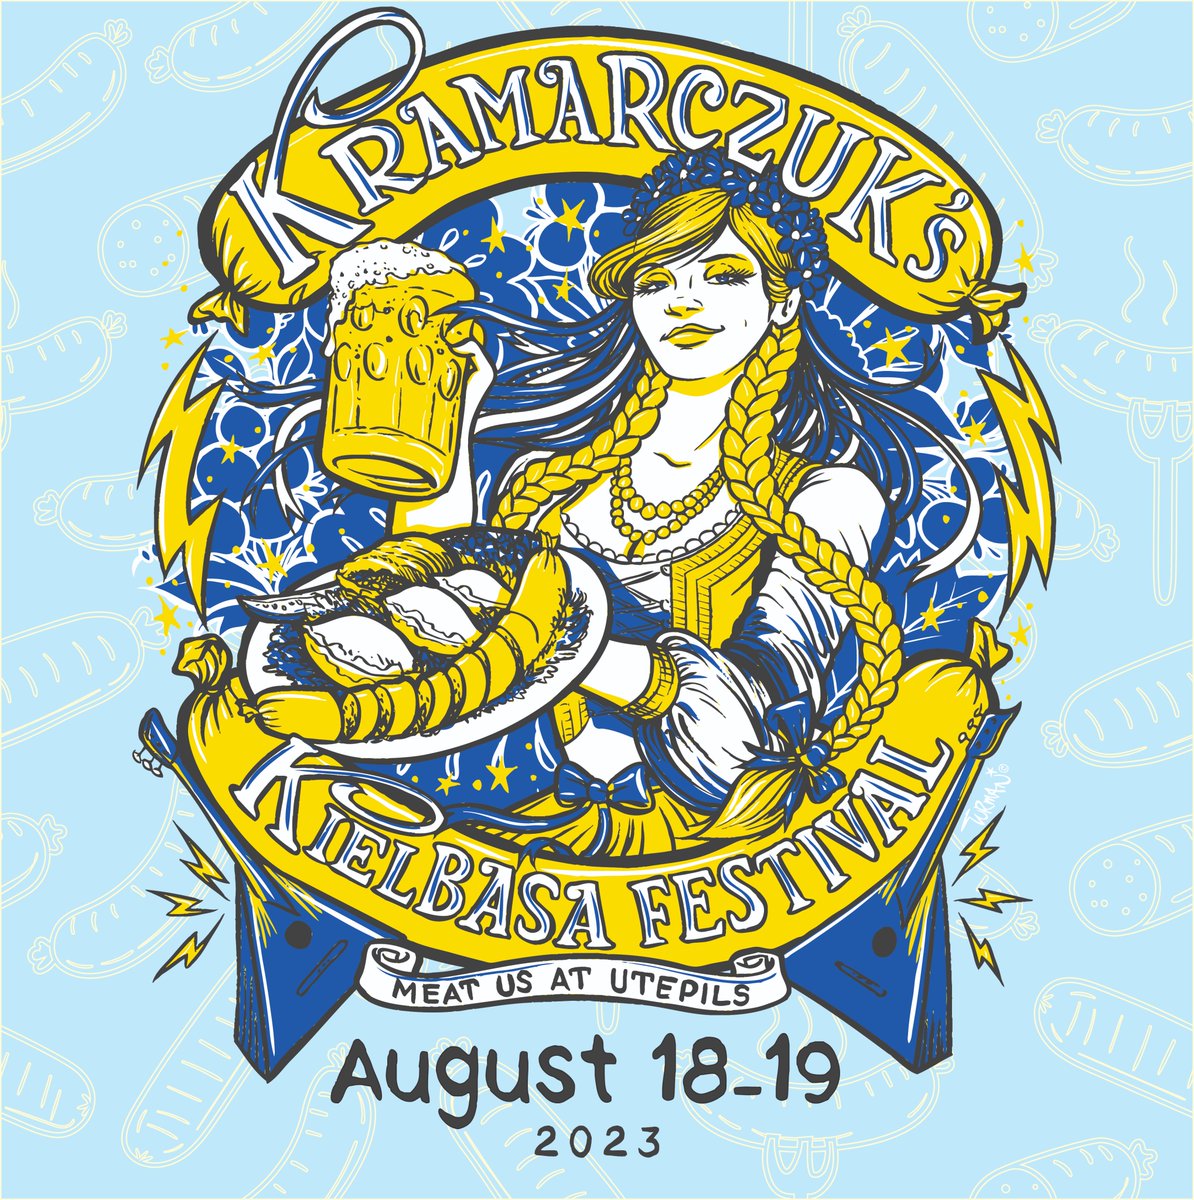 🍻 SAVE THE DATE 🍻 We're partnering with our friends over at @kramarczuks for KIELBASA FEST! So pop those dates in your calendar and keep checking back for more updates. 🍺